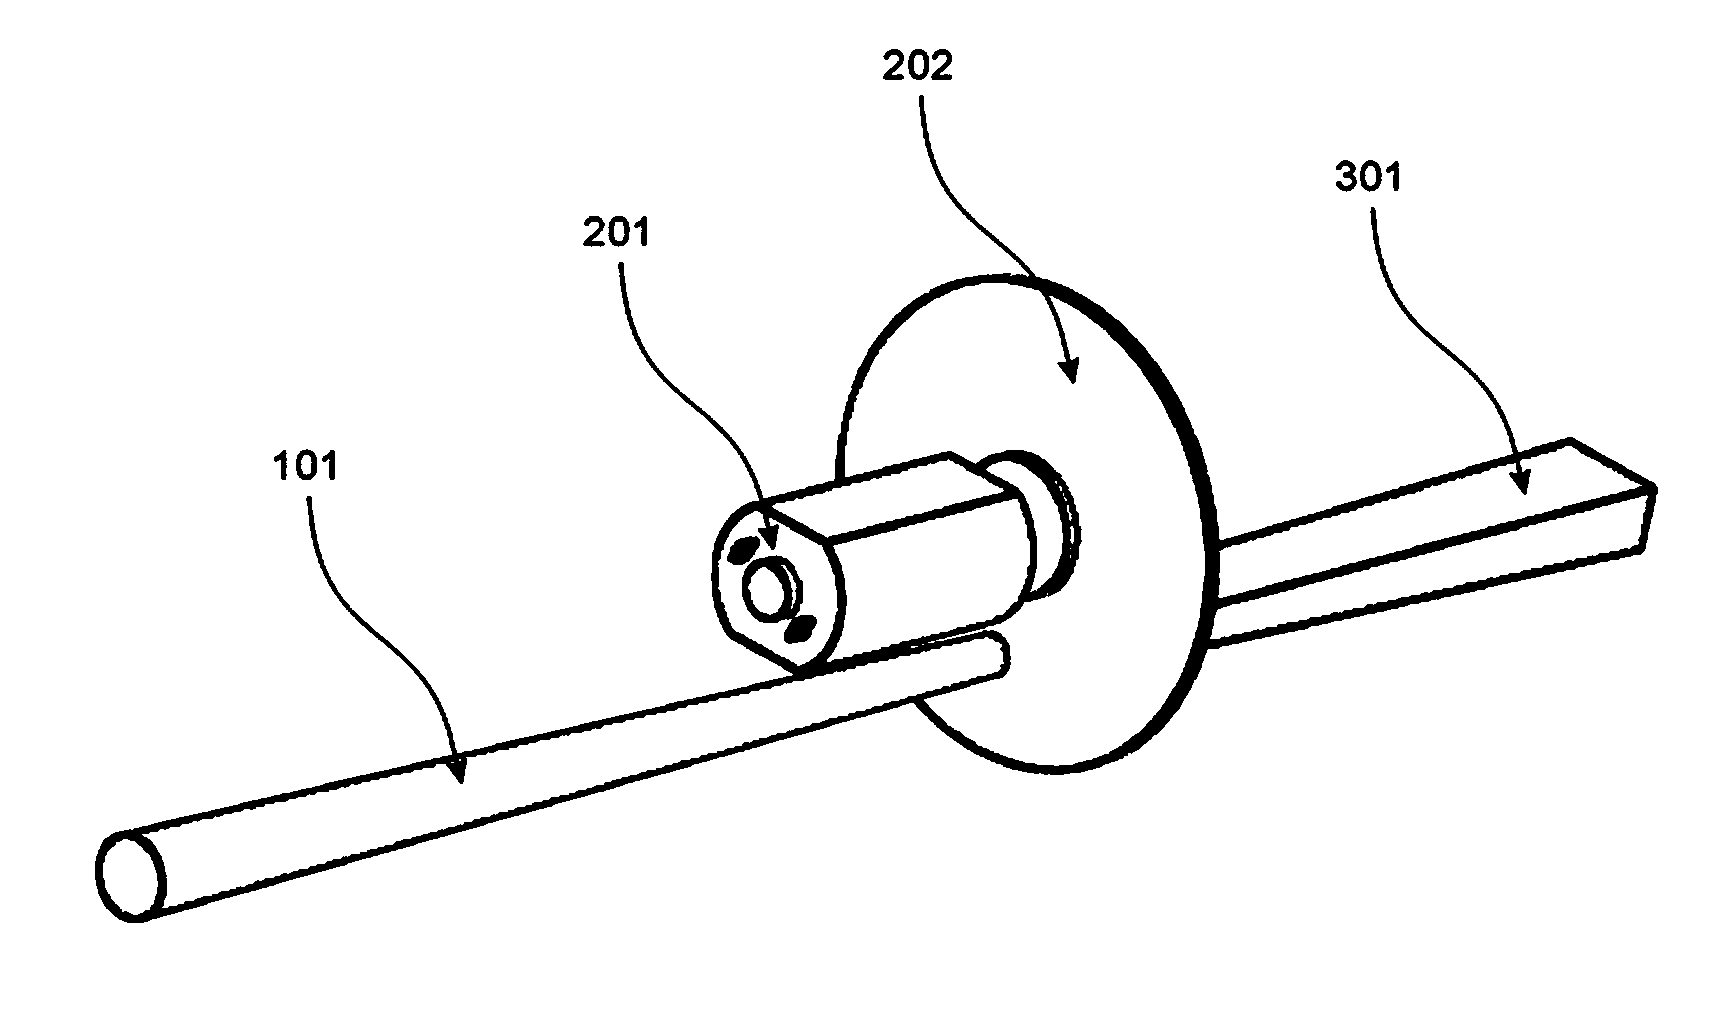 Shimming and speckle restraining device